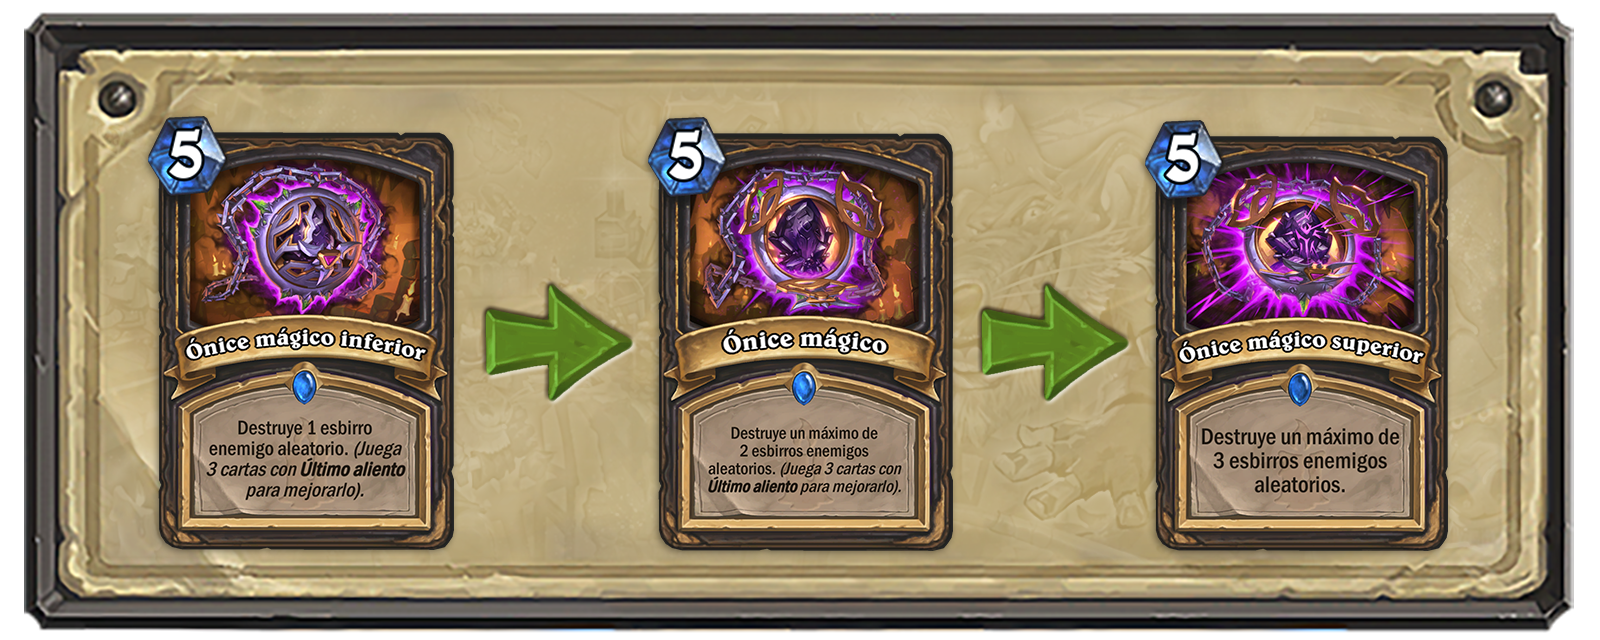 esES_Cards_HS_Onyx_LW_1000x690.png